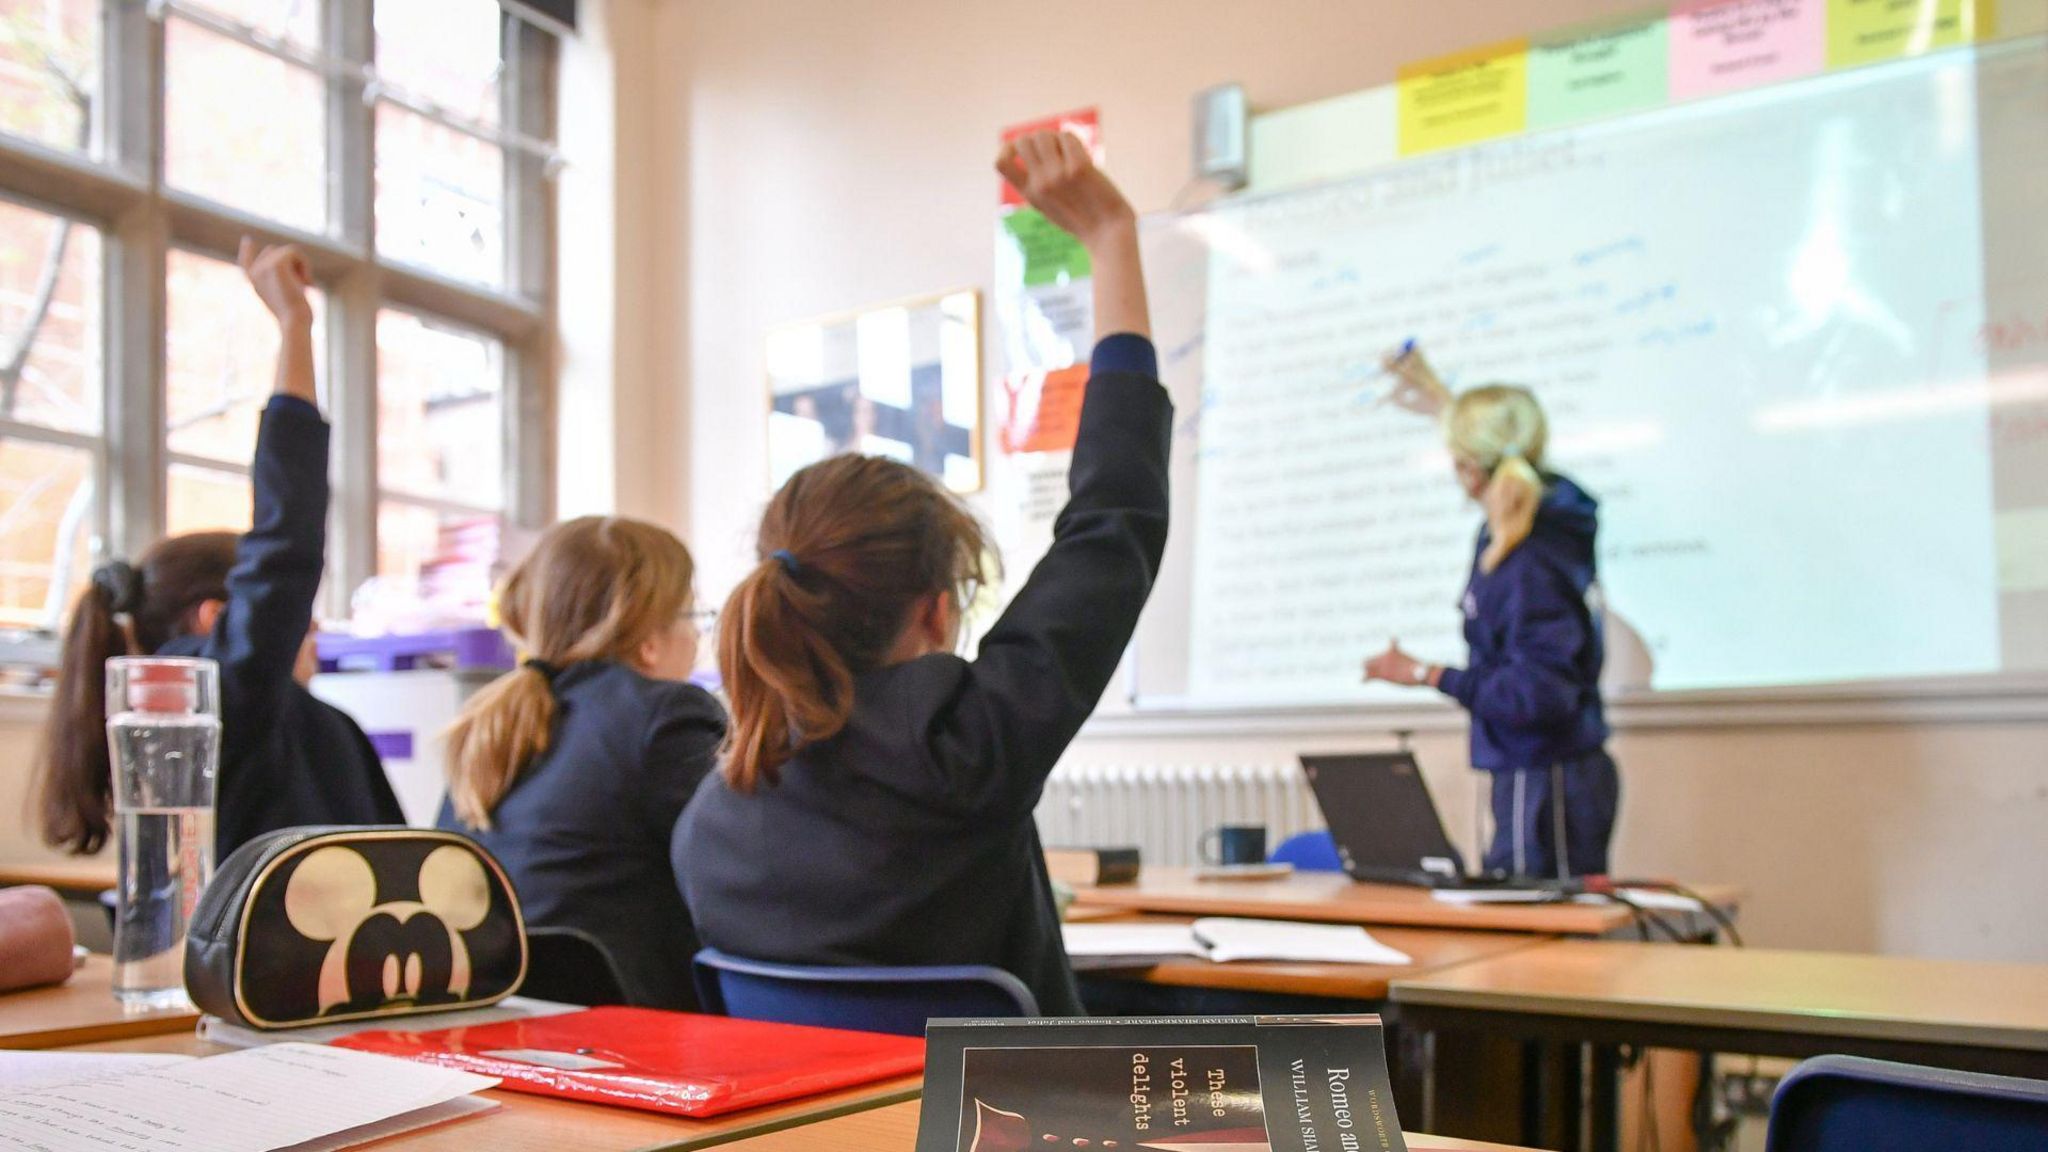 A stock image of children learning in a classroom